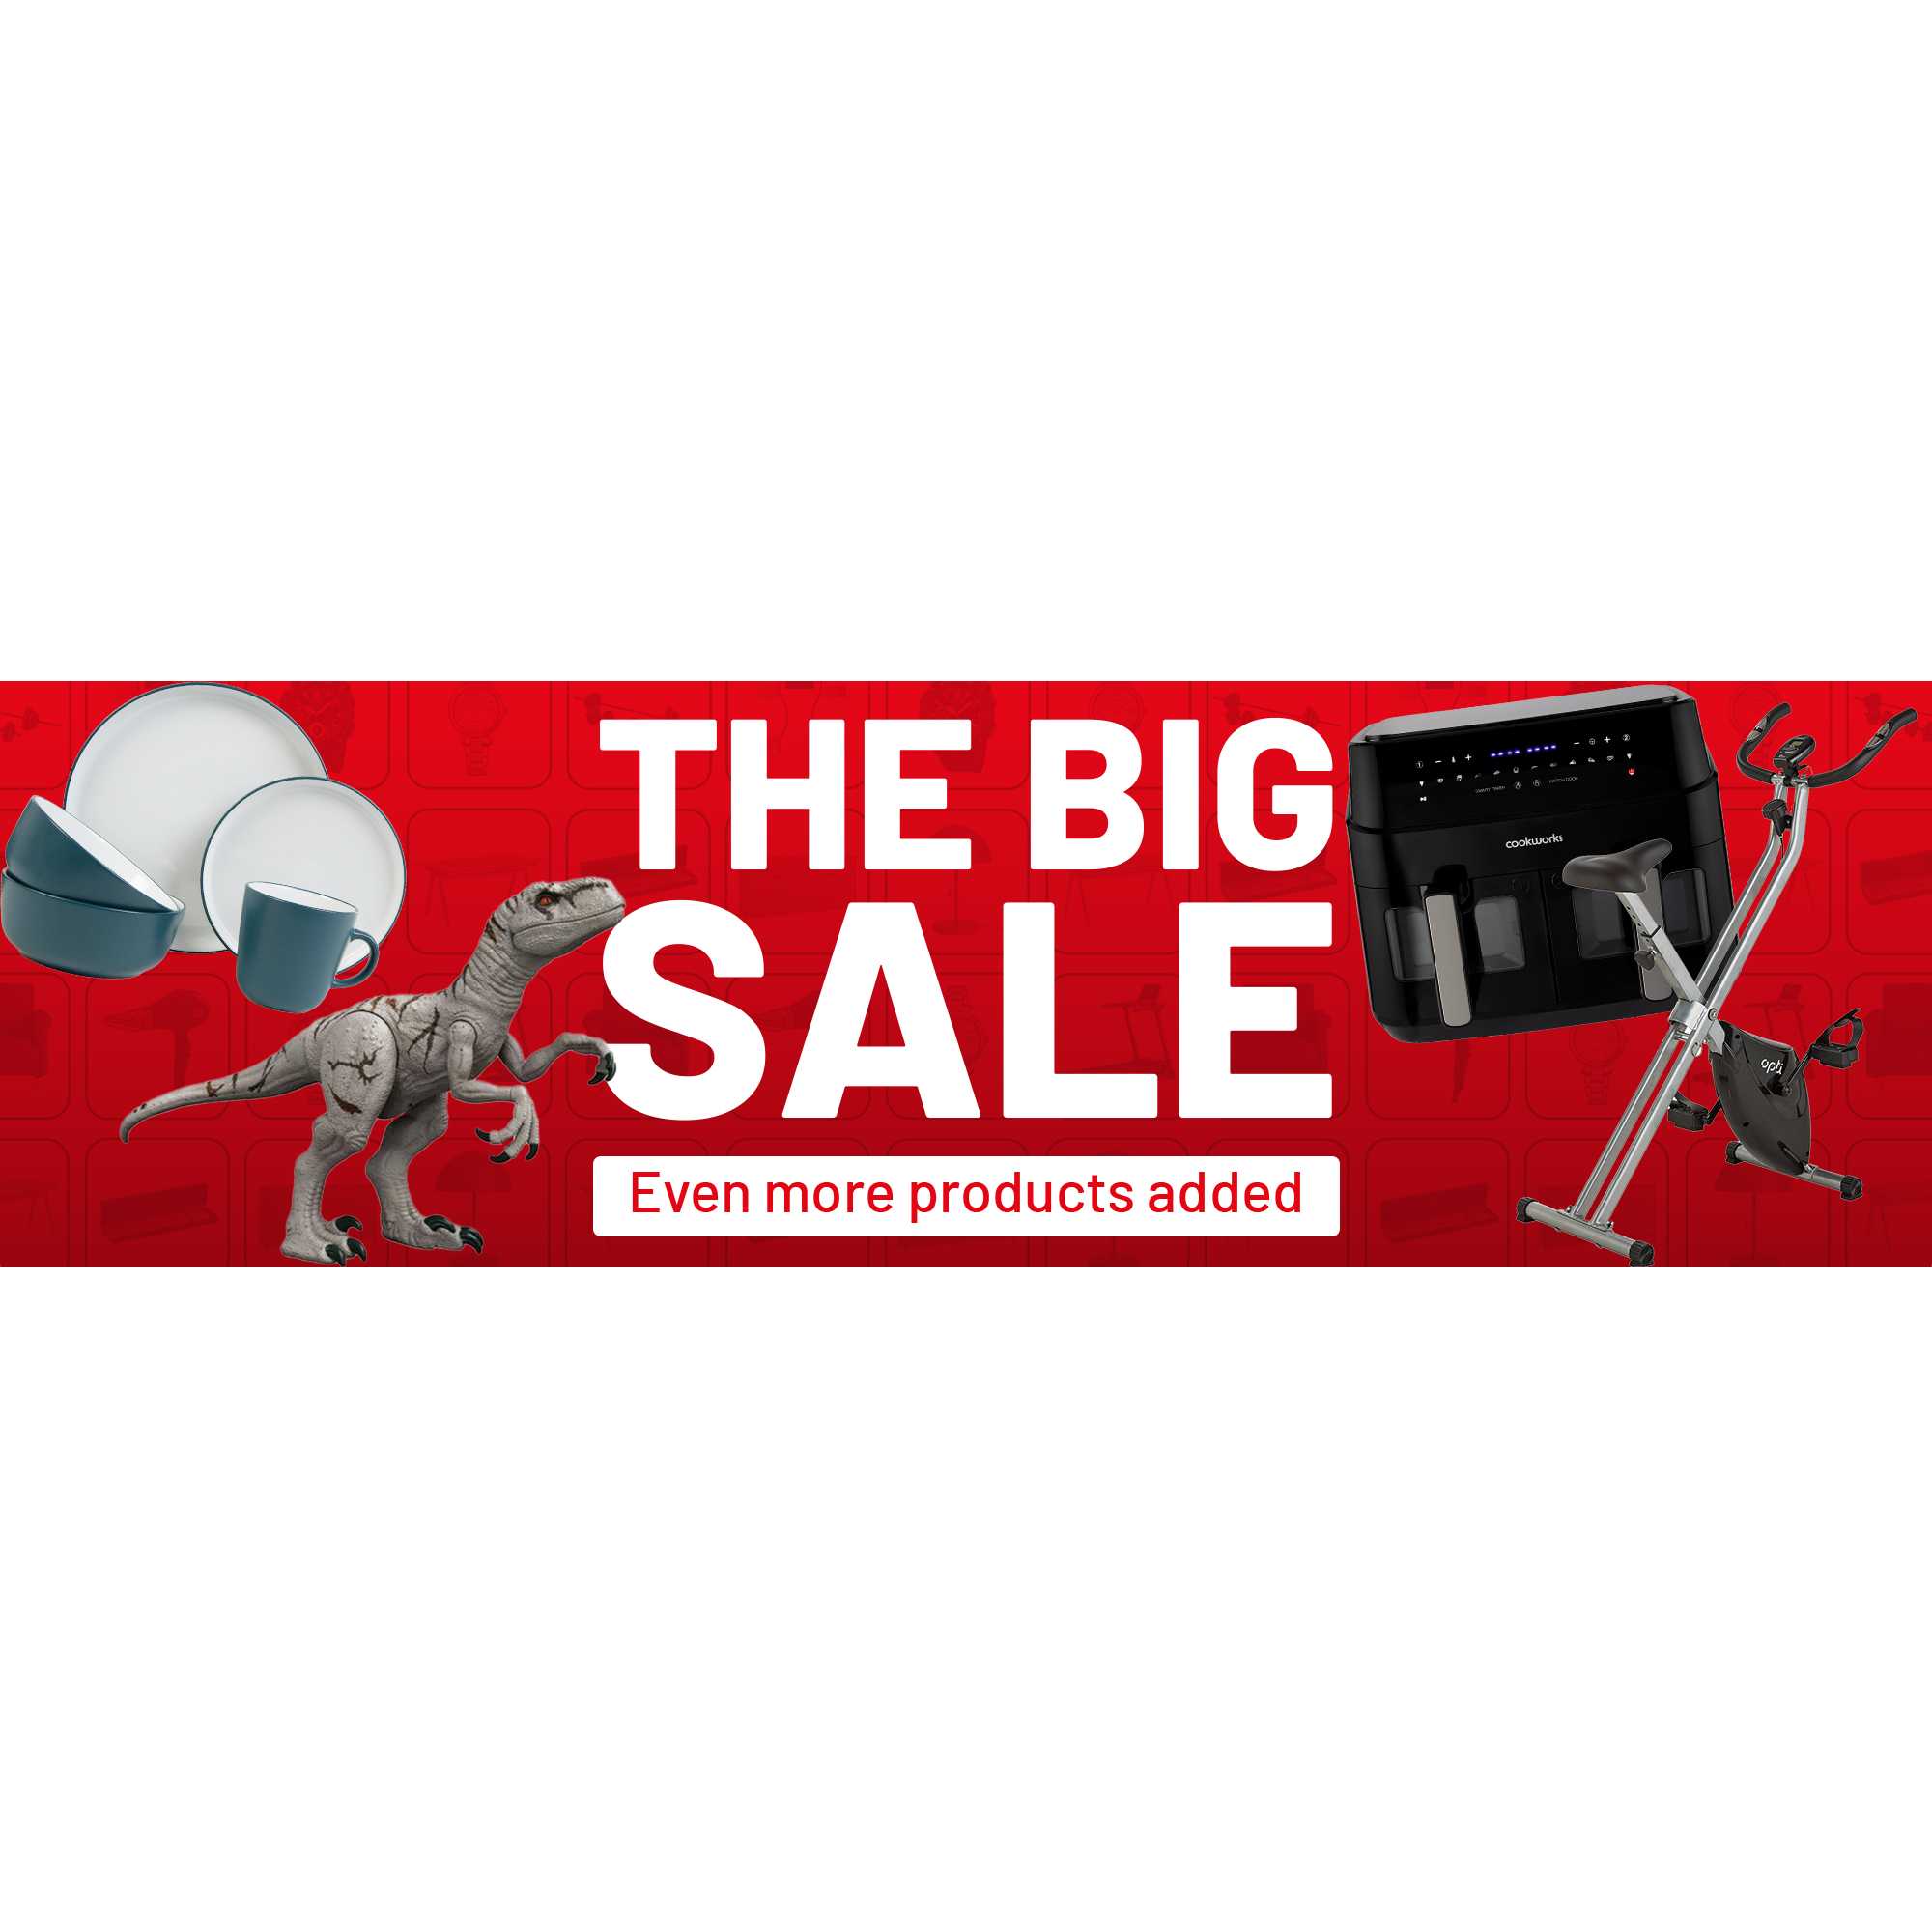  The Big Sale. Even more products added.